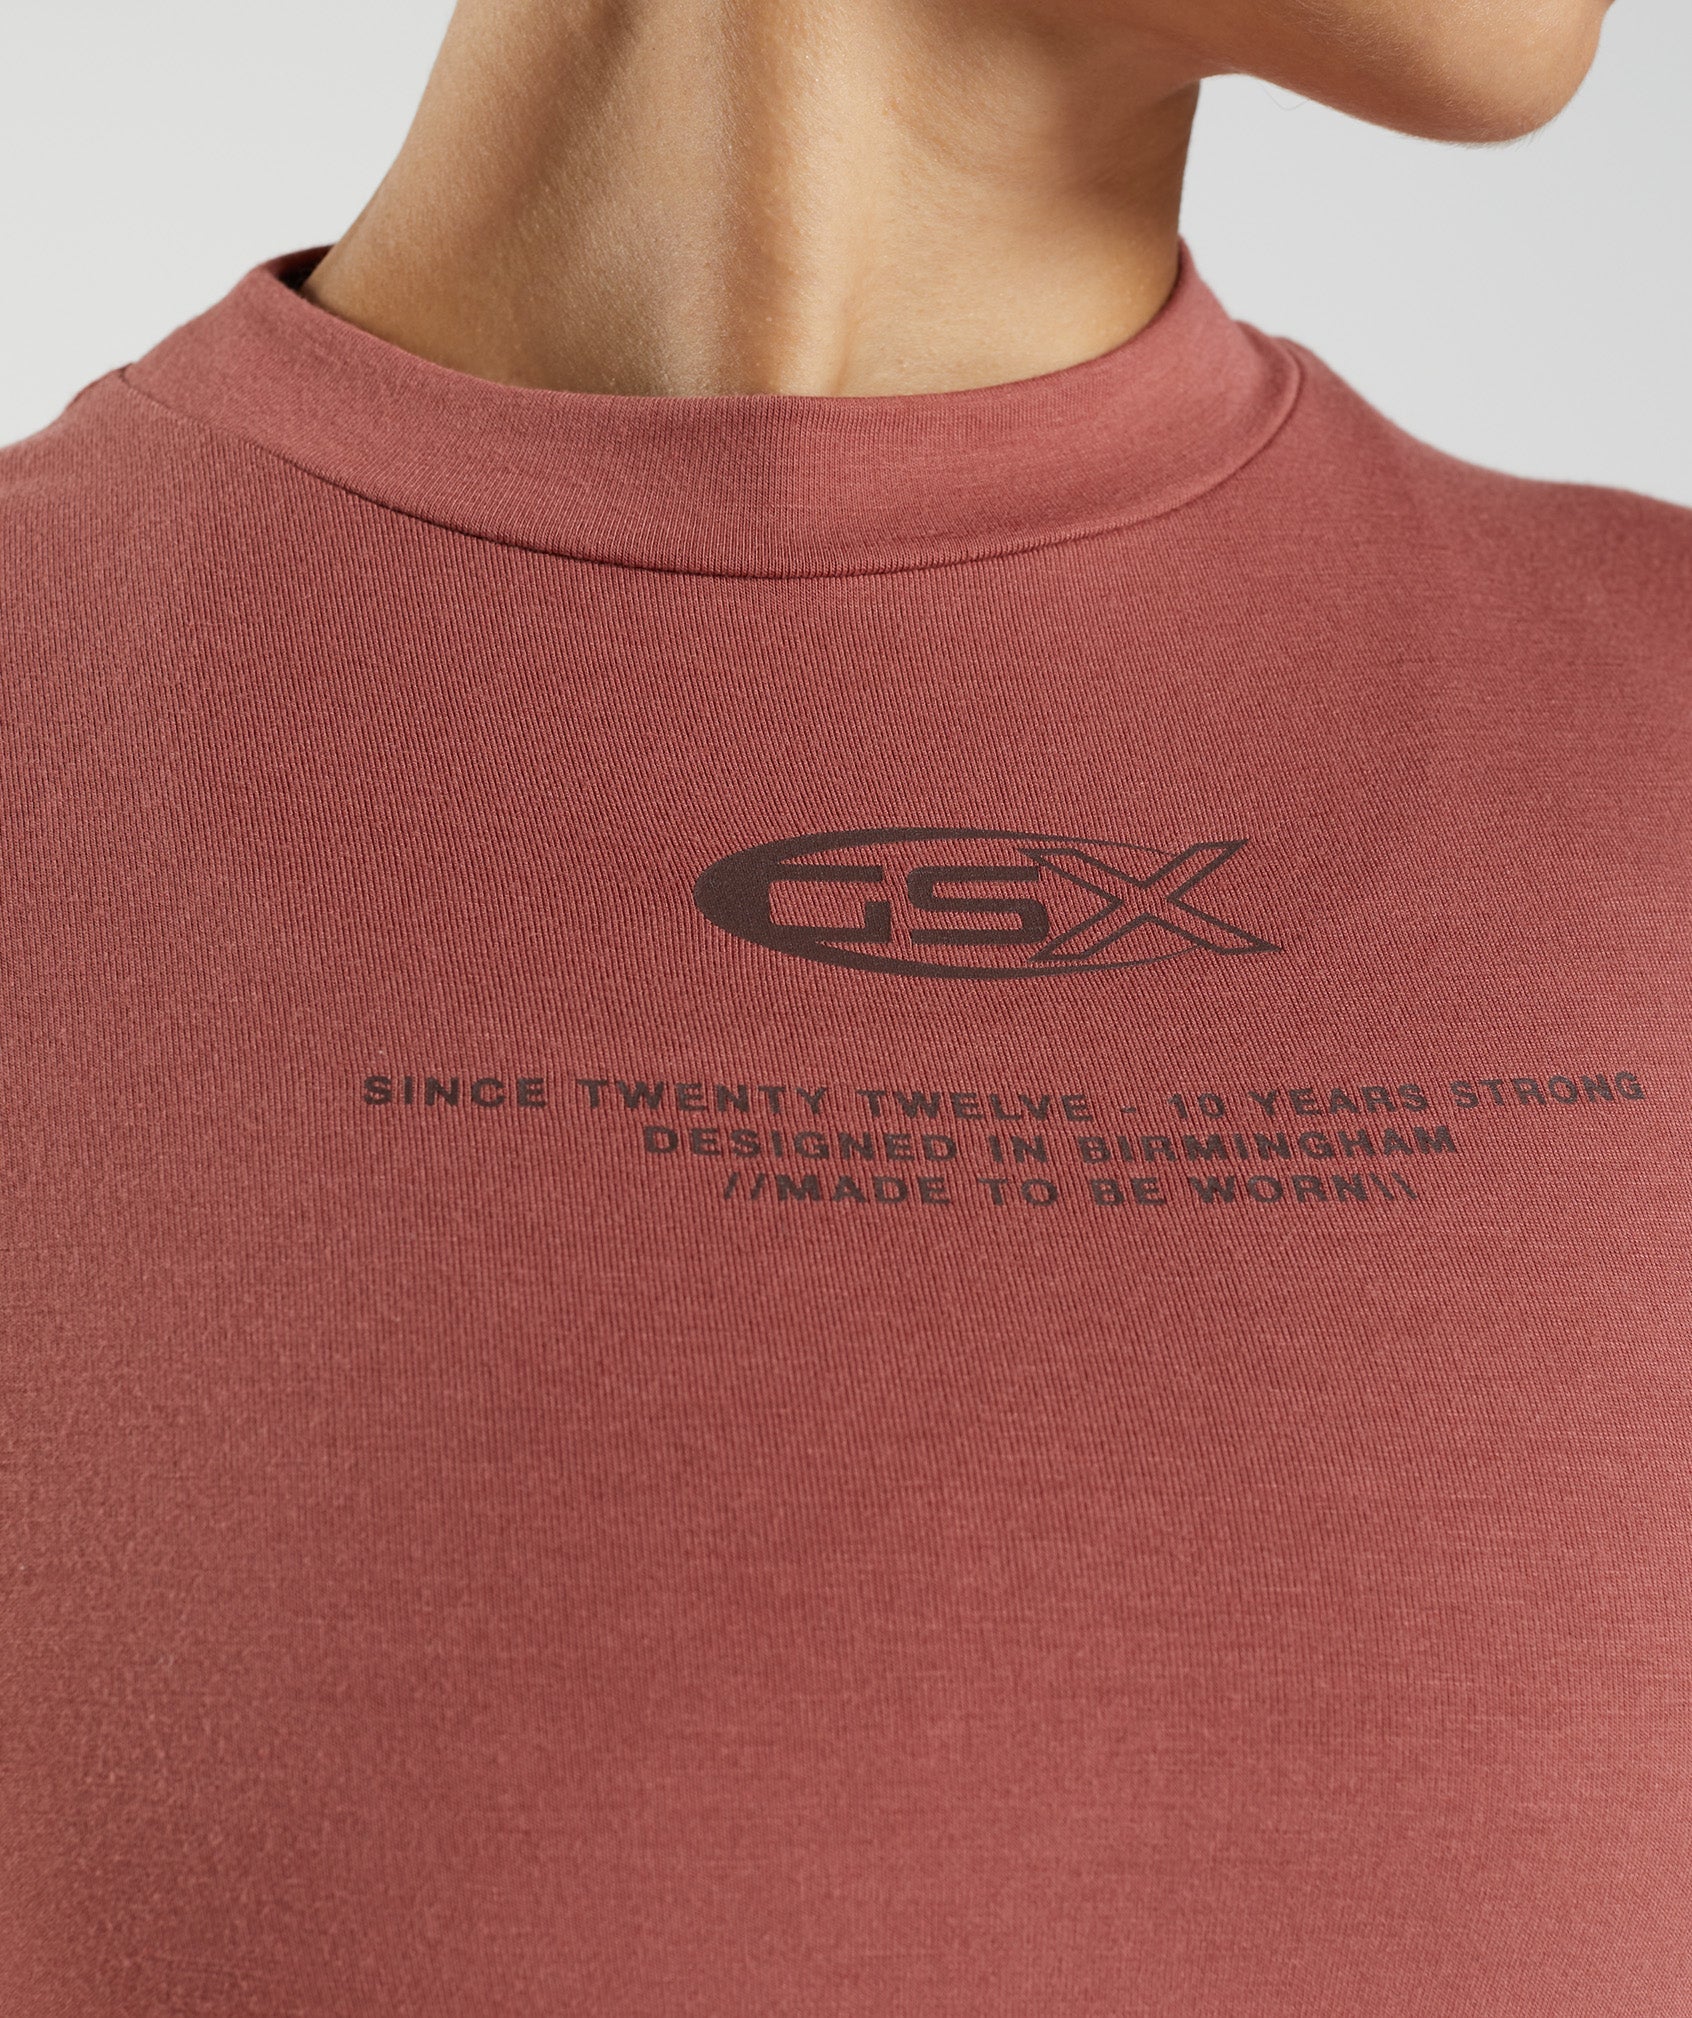 GS10 Year Body Fit T-Shirt in Rose Brown - view 5